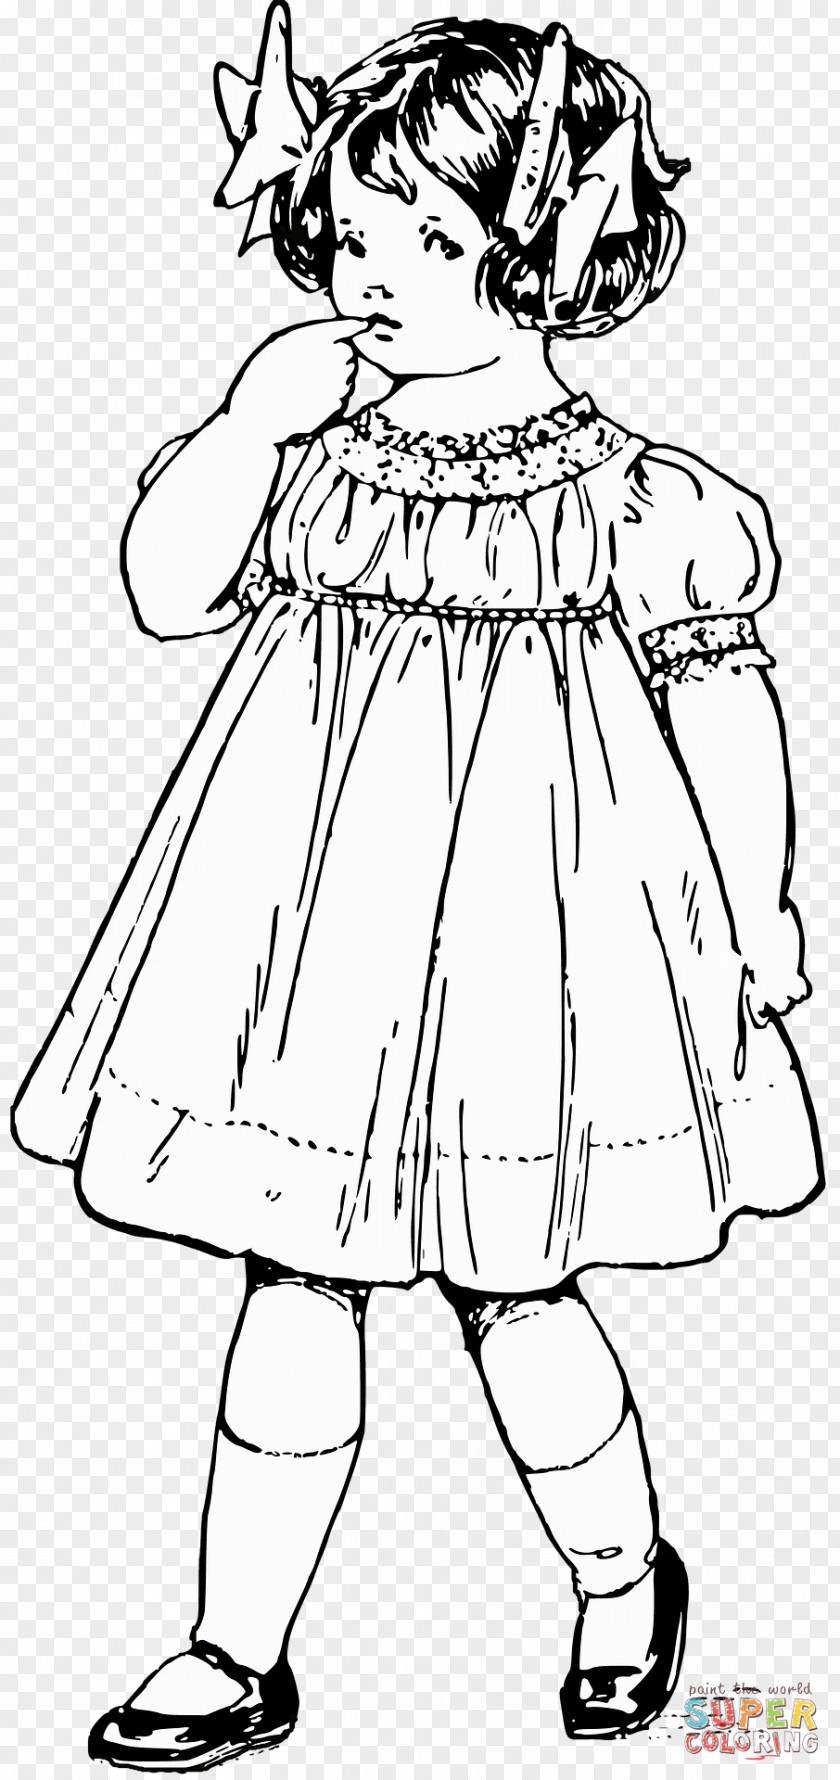 Woman Black And White Line Art Dress Drawing PNG